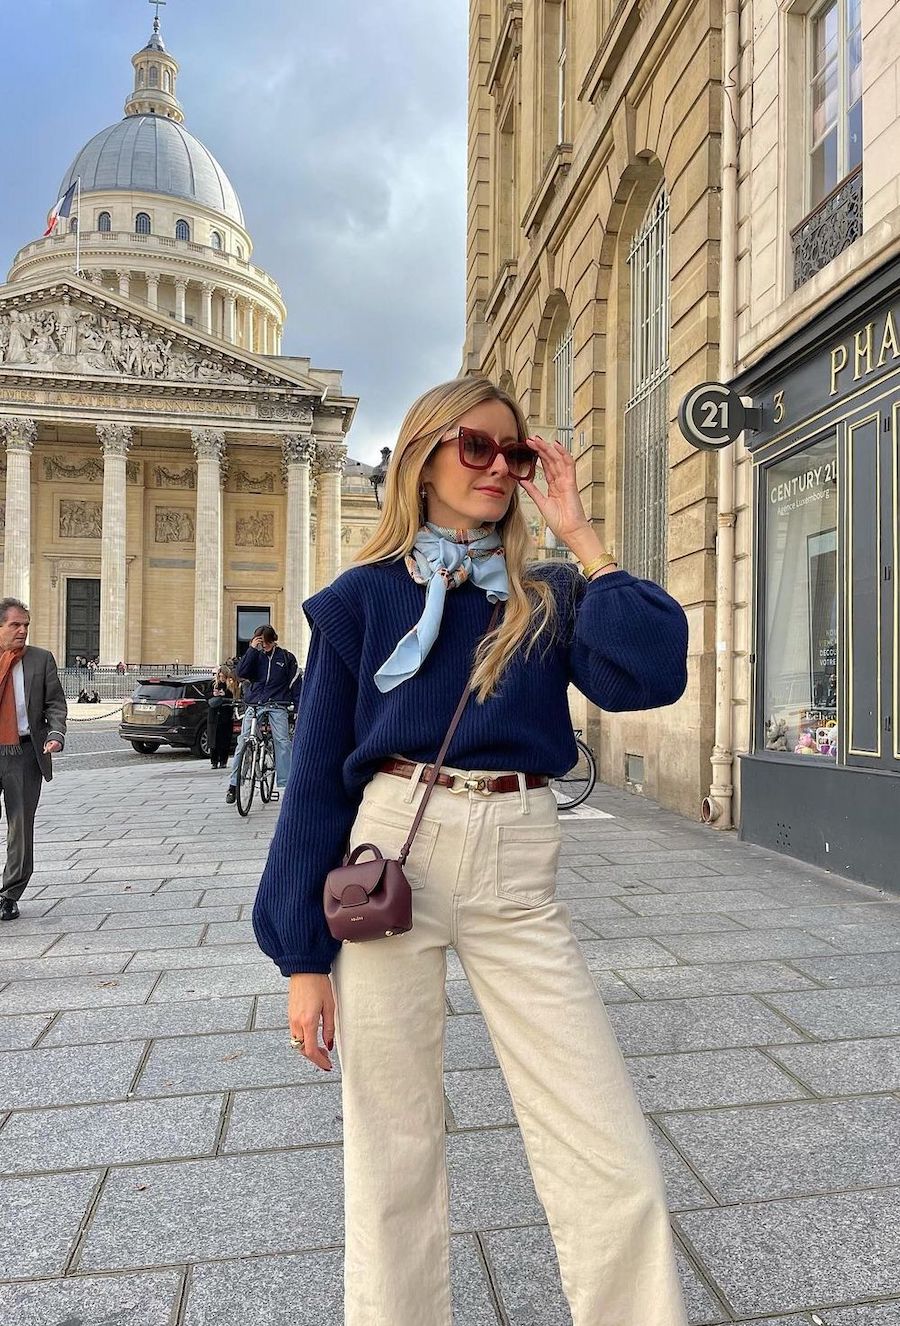 French fashion influencers jeanne_andreaa